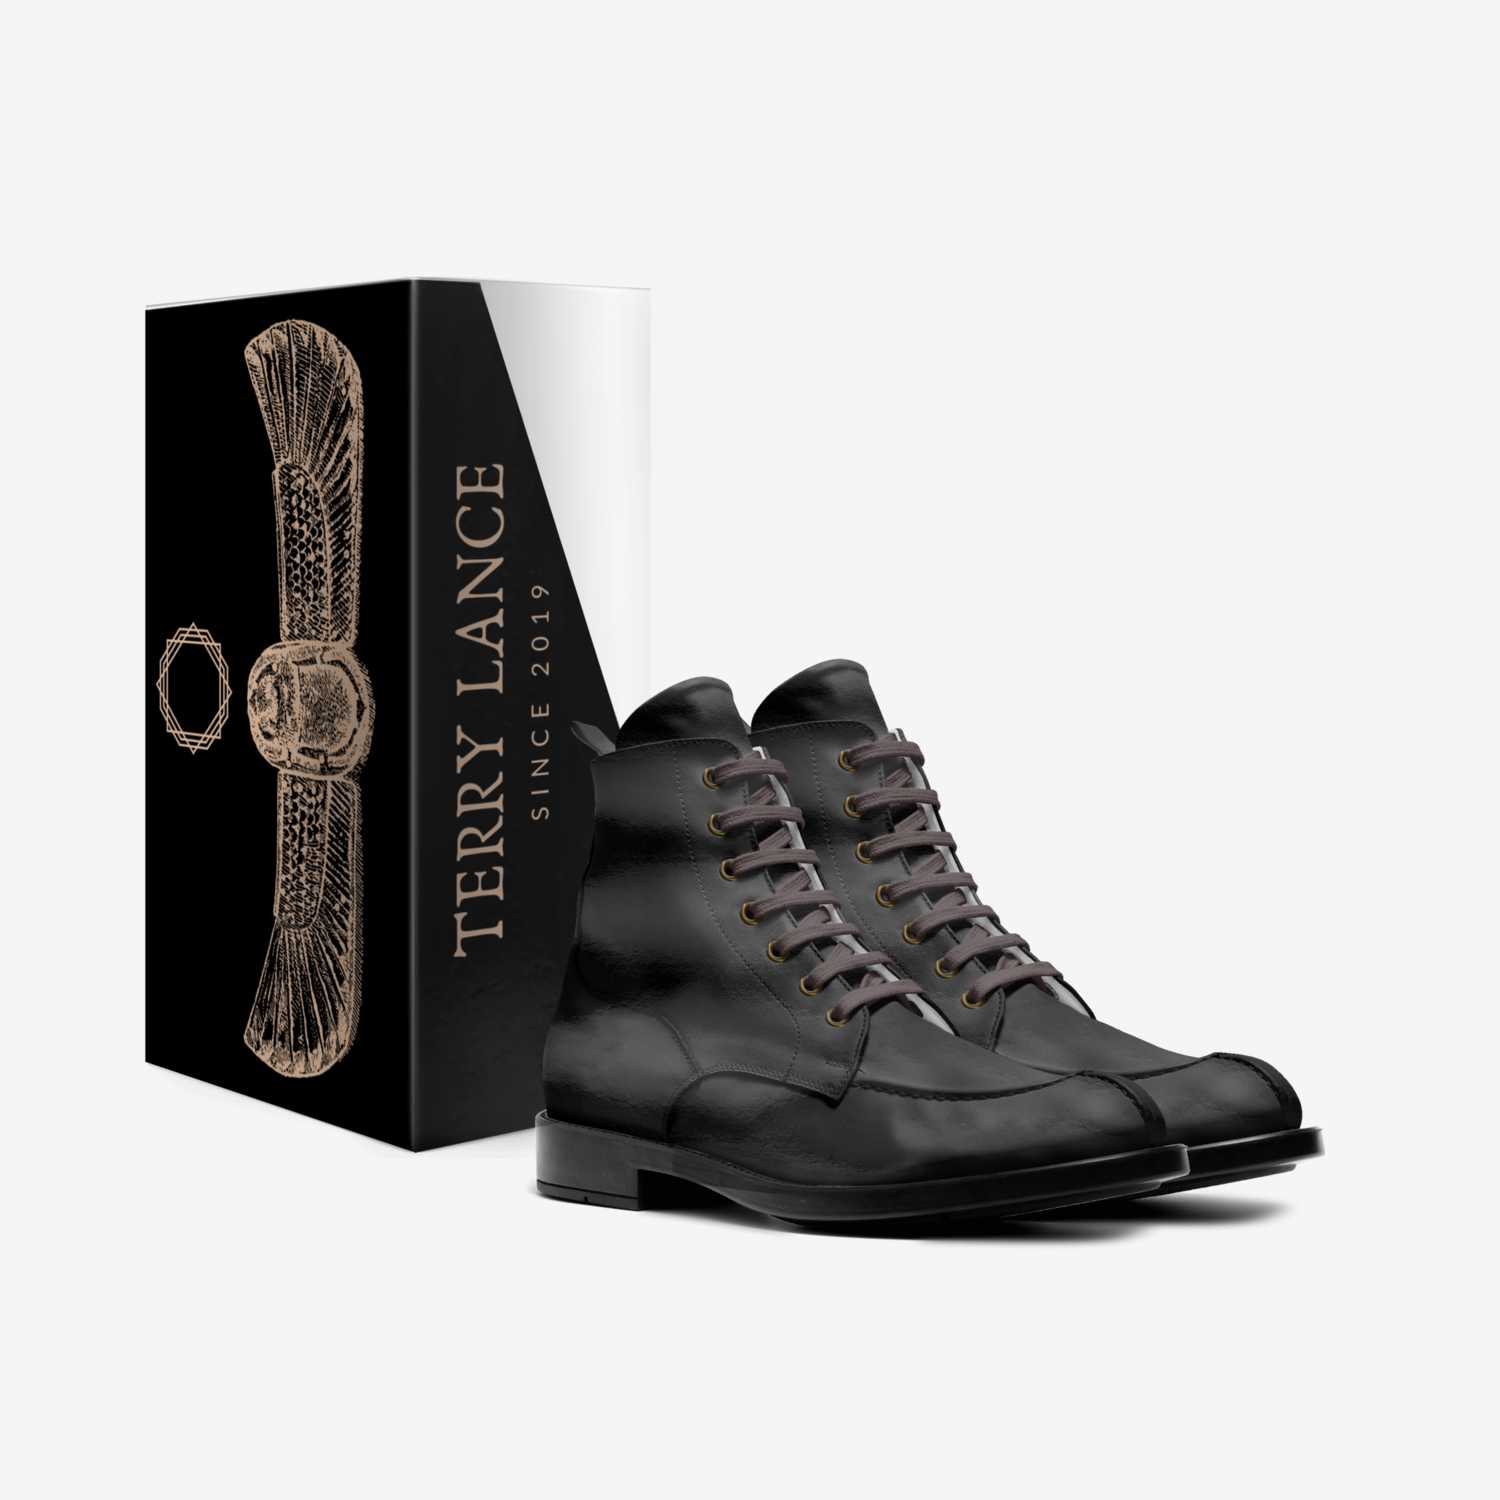 Terry Lance custom made in Italy shoes by Terry Lance | Box view